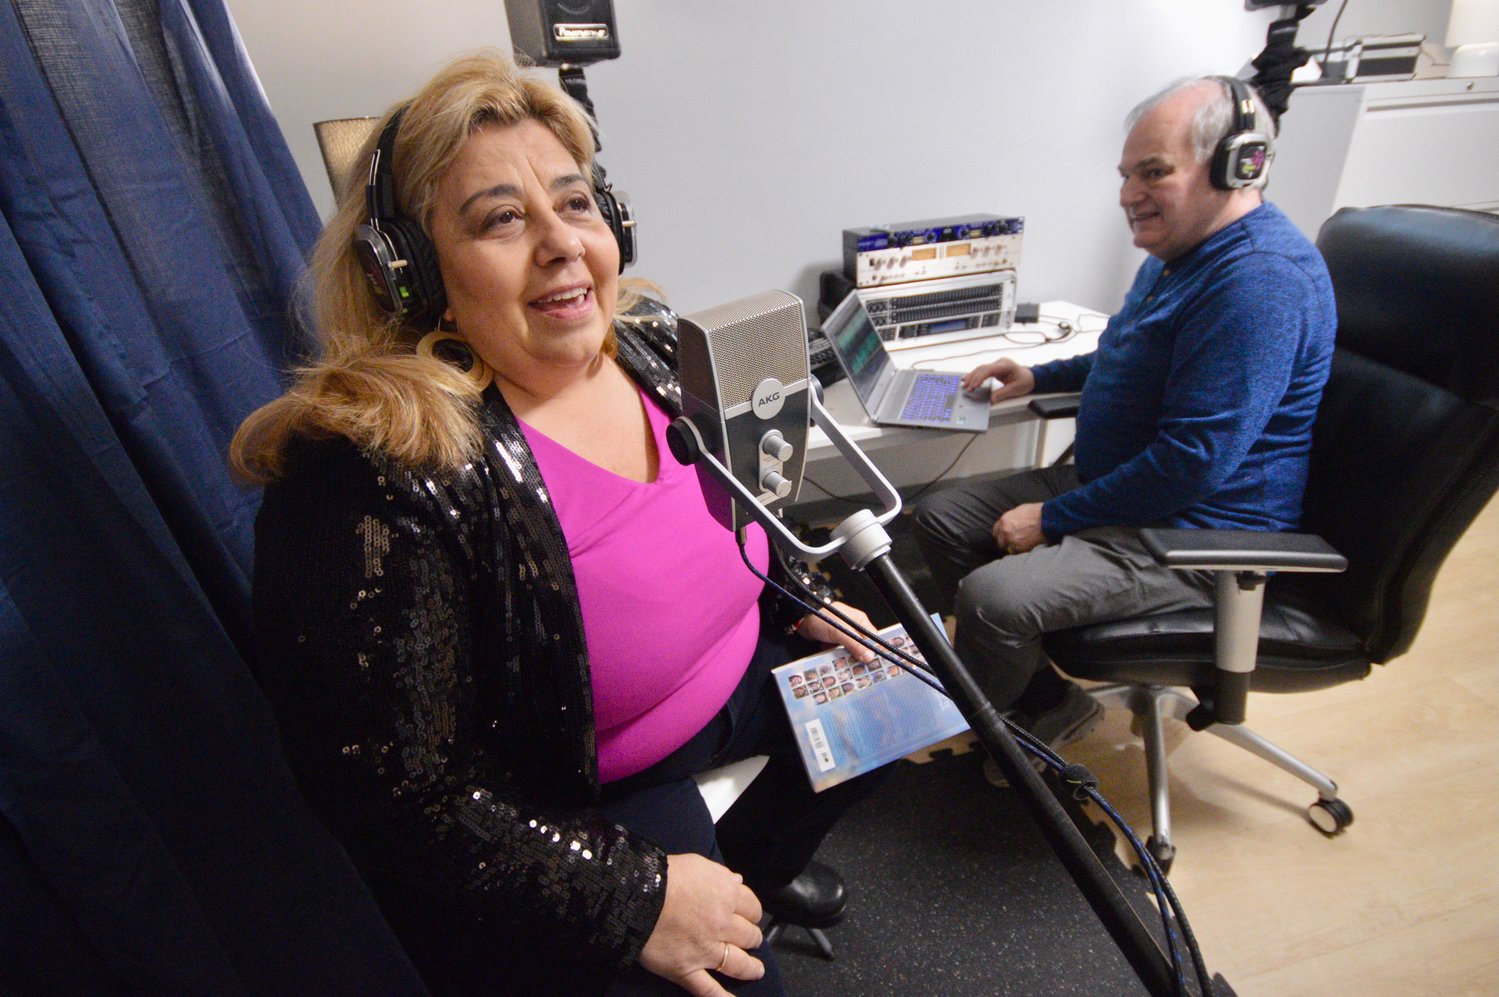 Cynthia Fontaine, a psychic medium who lives in Tiverton but grew up in Common Fence Music, tests out the new recording studio in the basement of the CFP Arts, Wellness and Community Center, with Music at the Point co-founder David Breton at the controls. Fontaine is planning on making some meditation recordings at the student, which is available to the wider community.